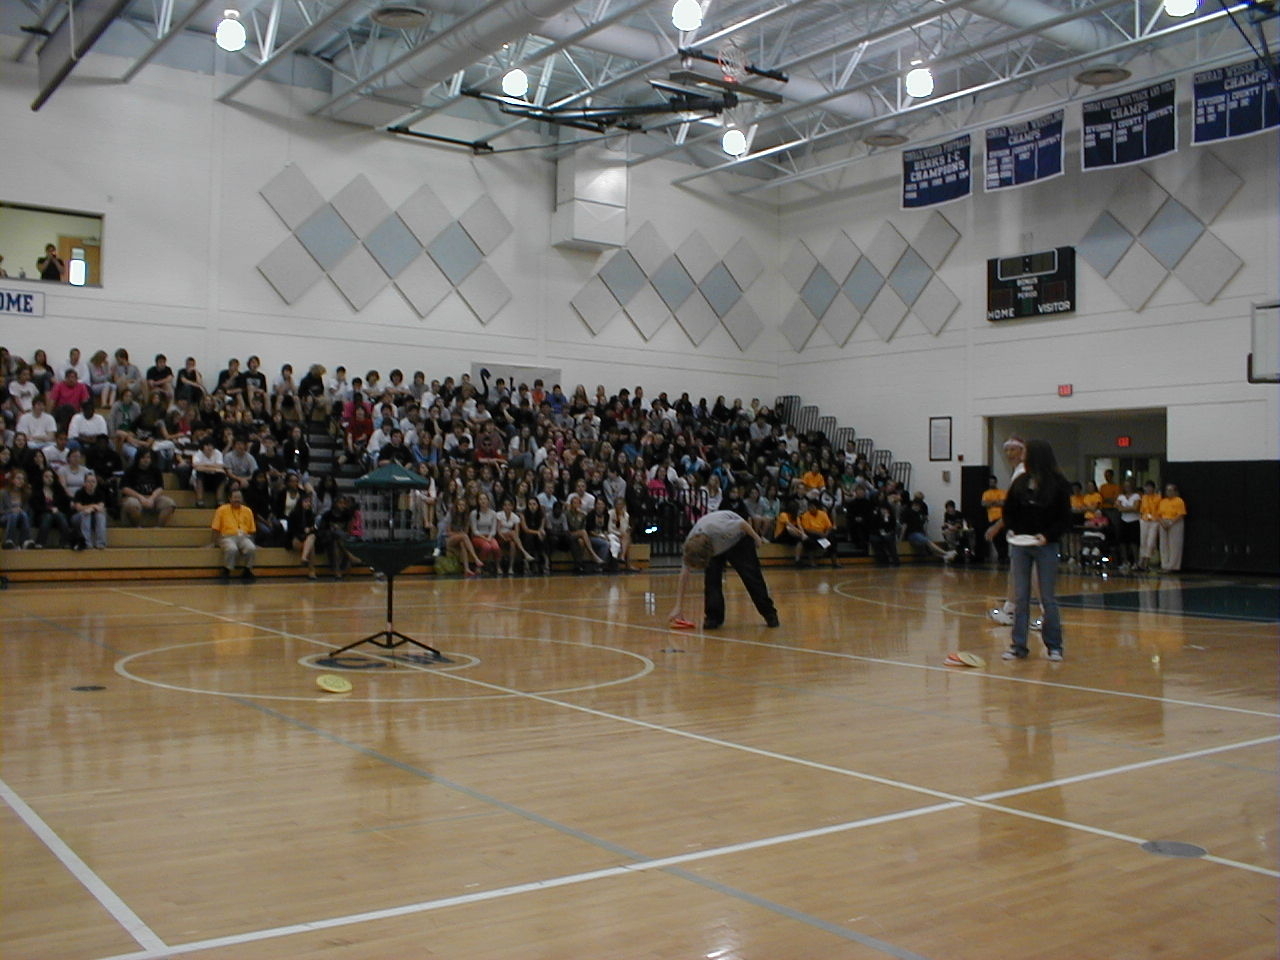 A larger school and gym,in the East coast.